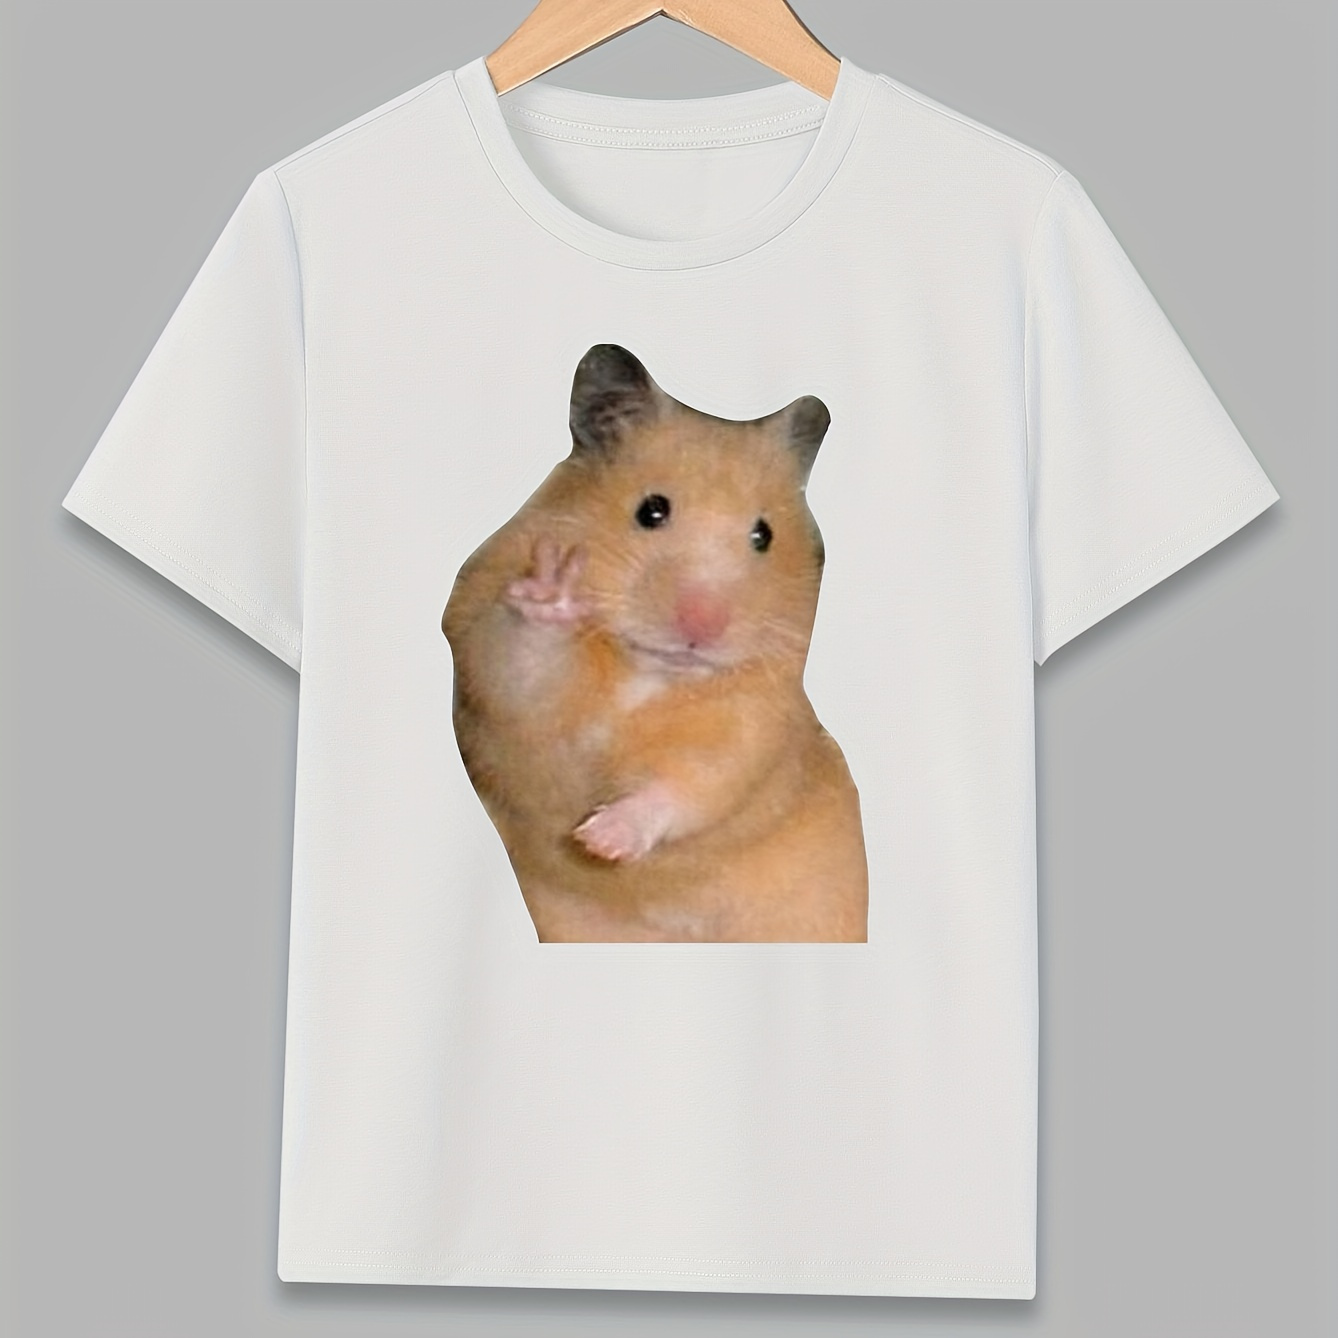 

Cute Hamster Graphic Print T-shirt, Short Sleeve Crew Neck Casual Top For Summer & Spring, Boy's Clothing